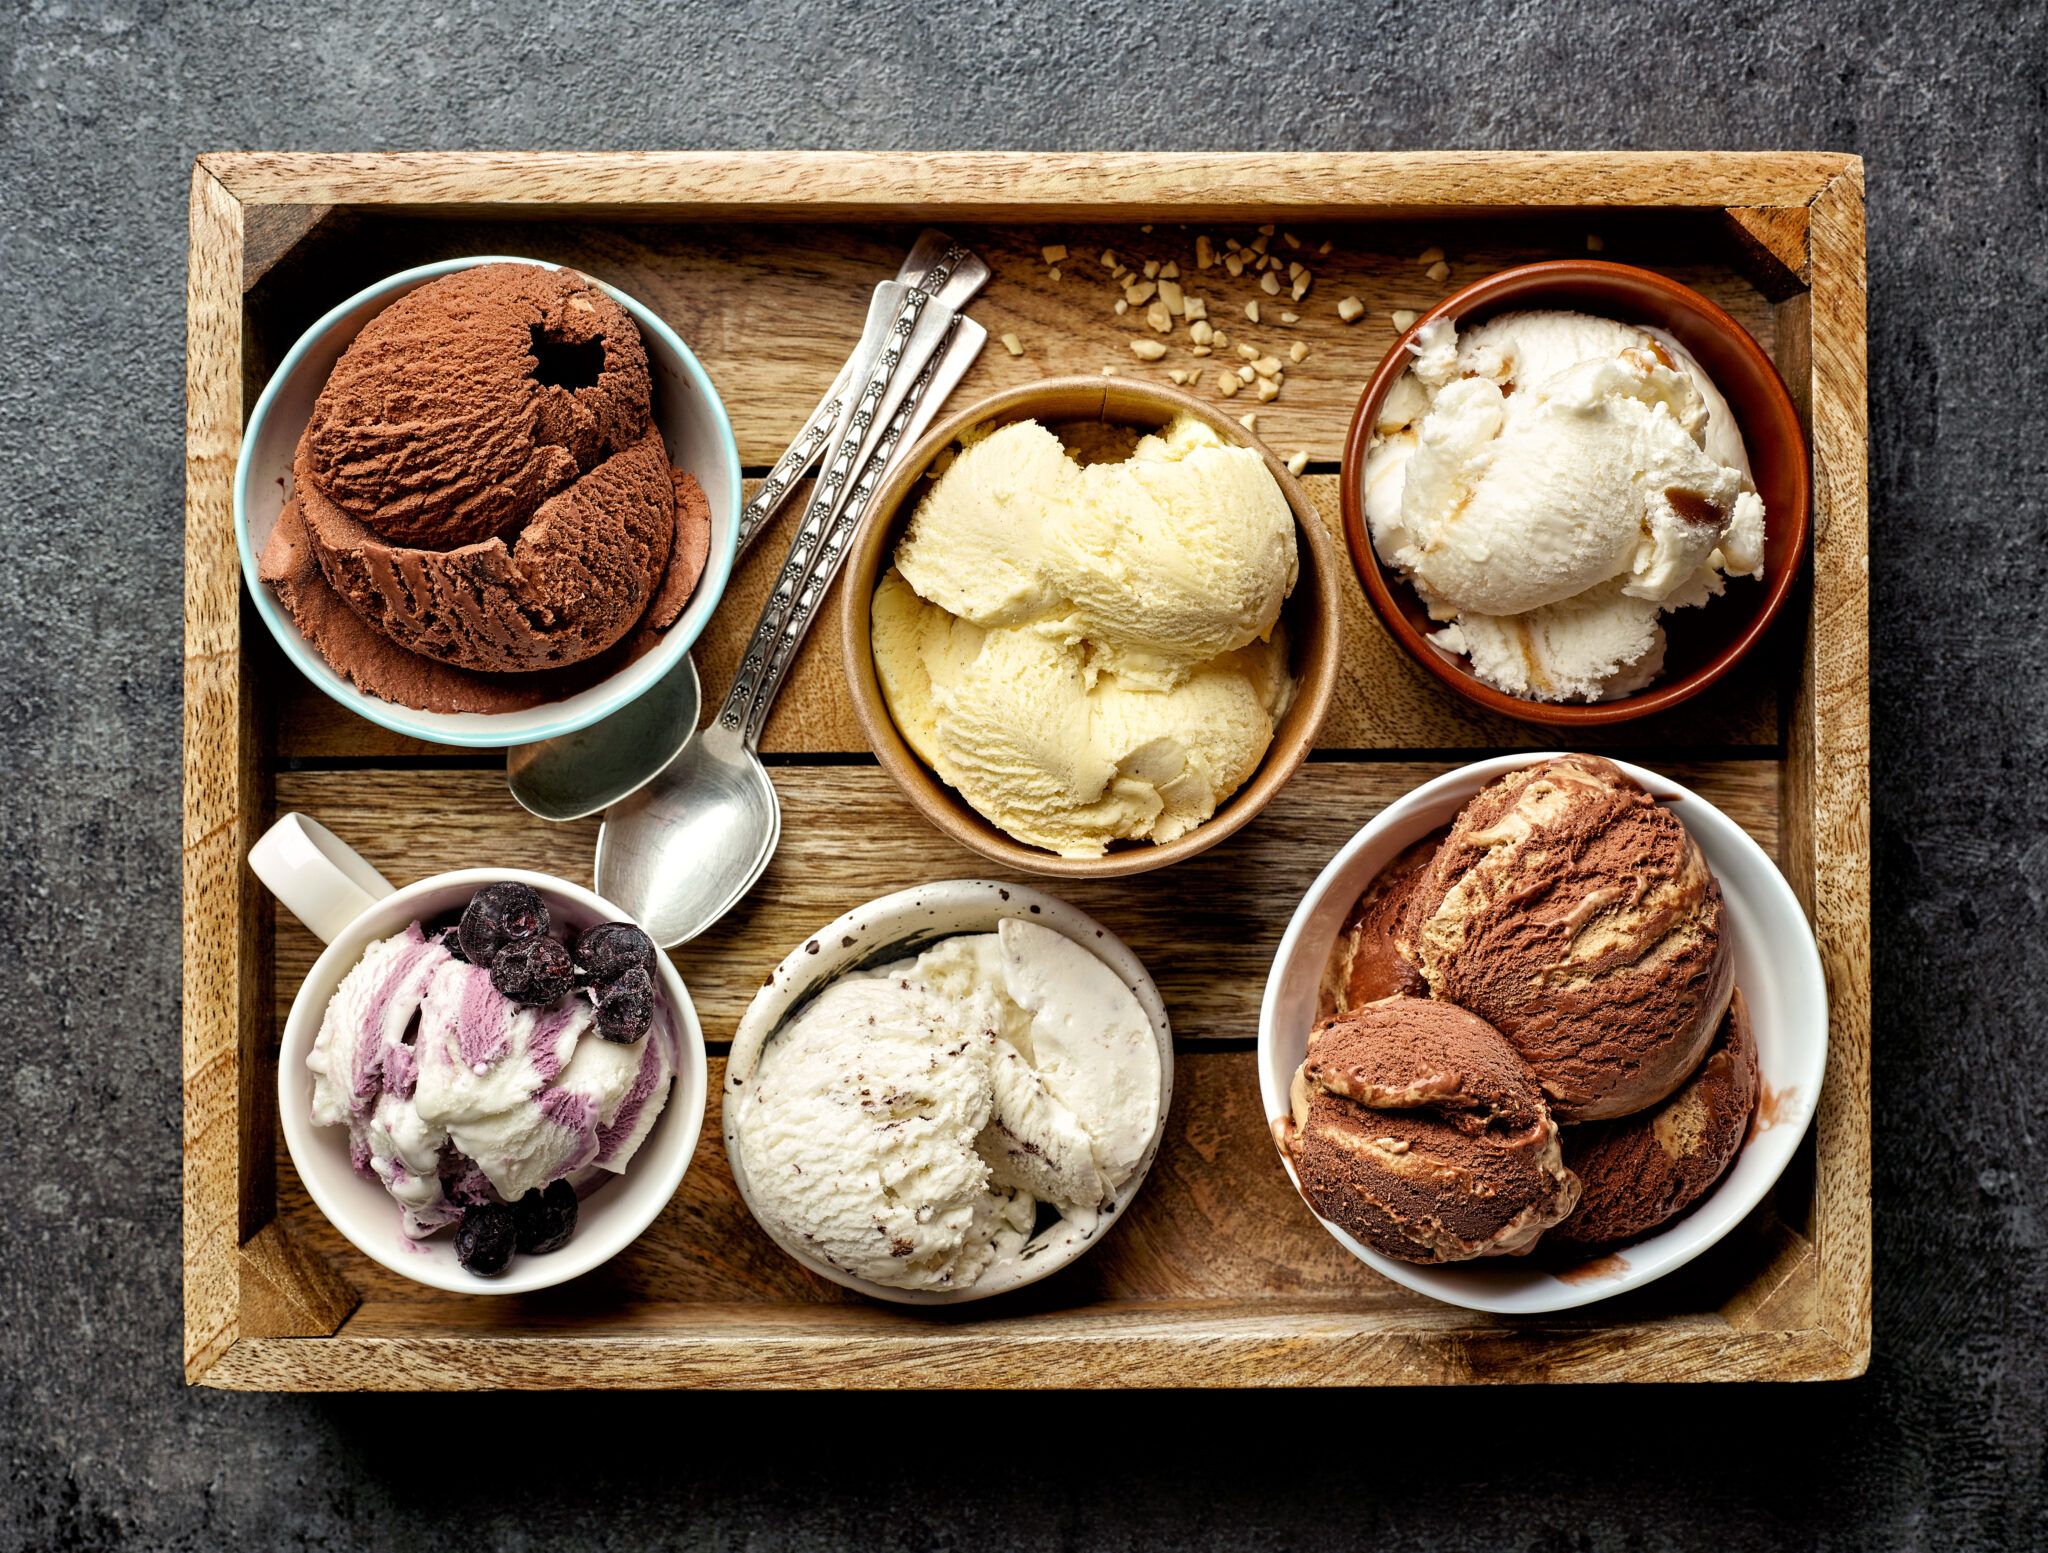 Get the Scoop on National Ice Cream Day! Price Chopper Market 32